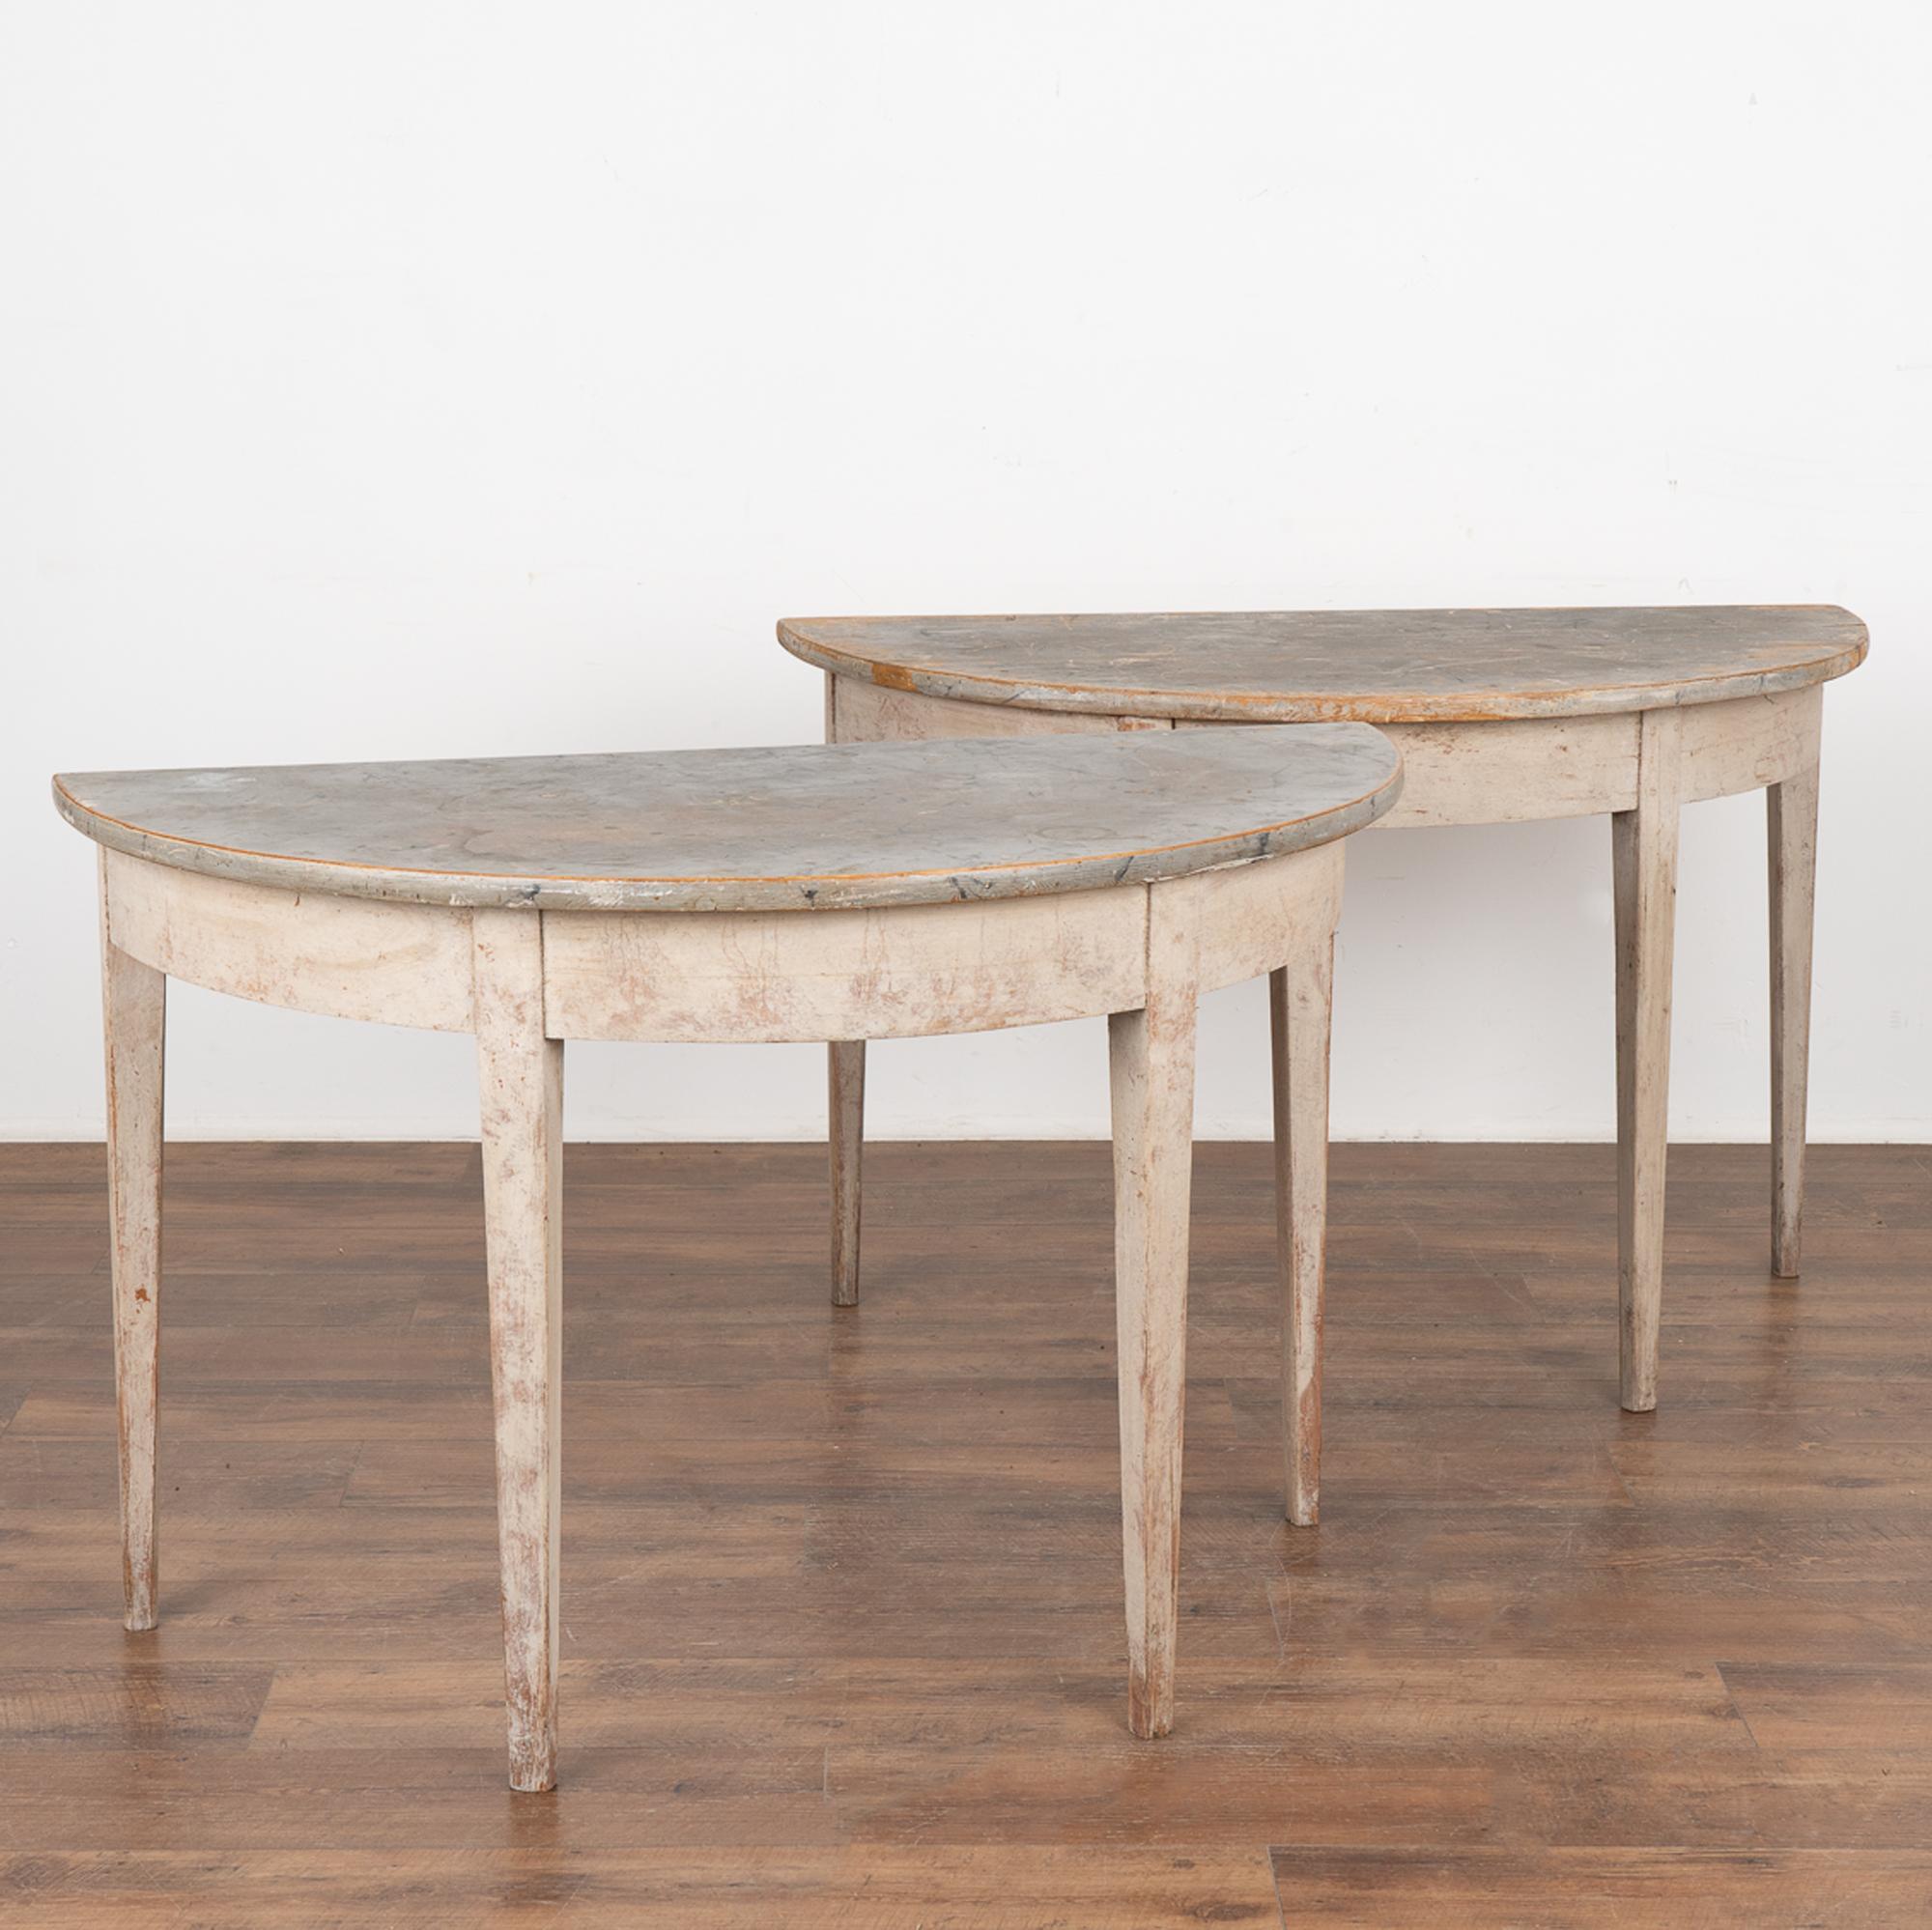 This pair of gray painted demi-lune tables with tapered legs still maintains the original painted finish with faux marble top which was a traditional Swedish style element of the era.
Note one of the tops shows much more distress with wear all the